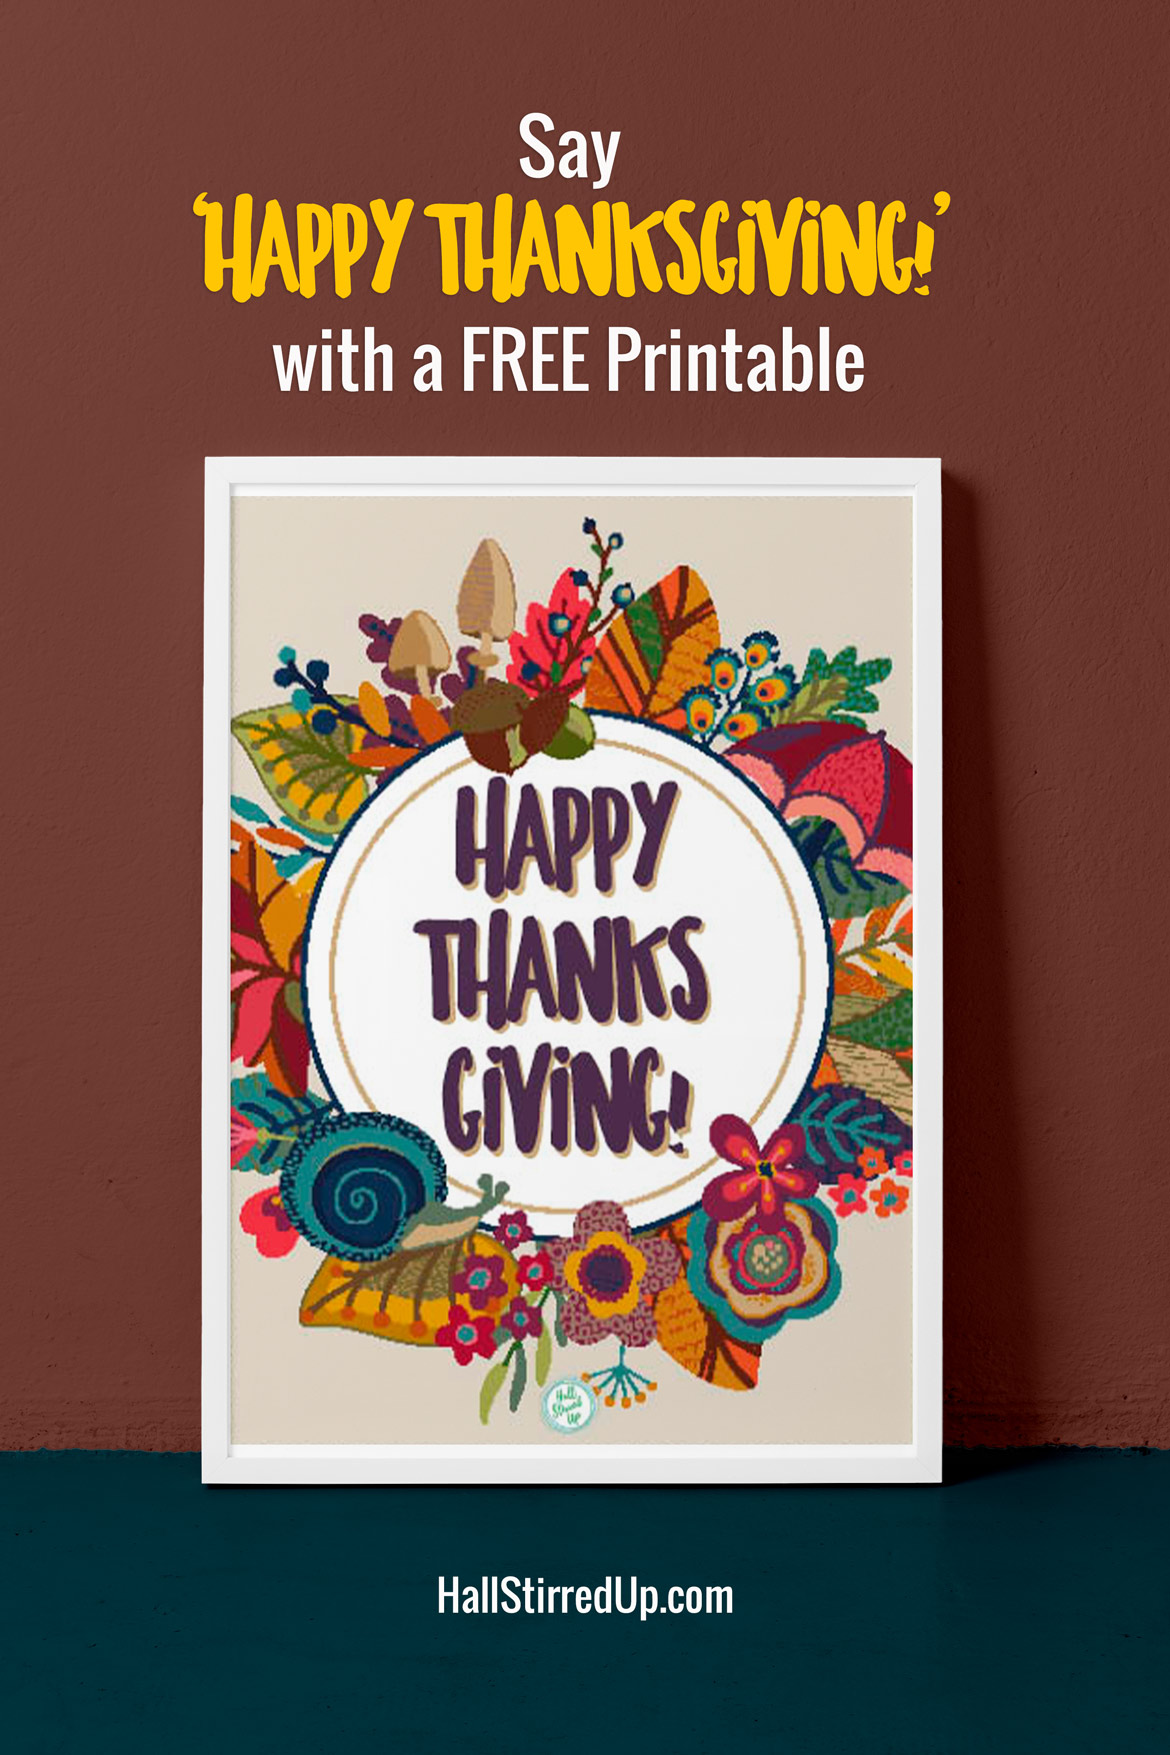 Happy Thanksgiving and a new free printable